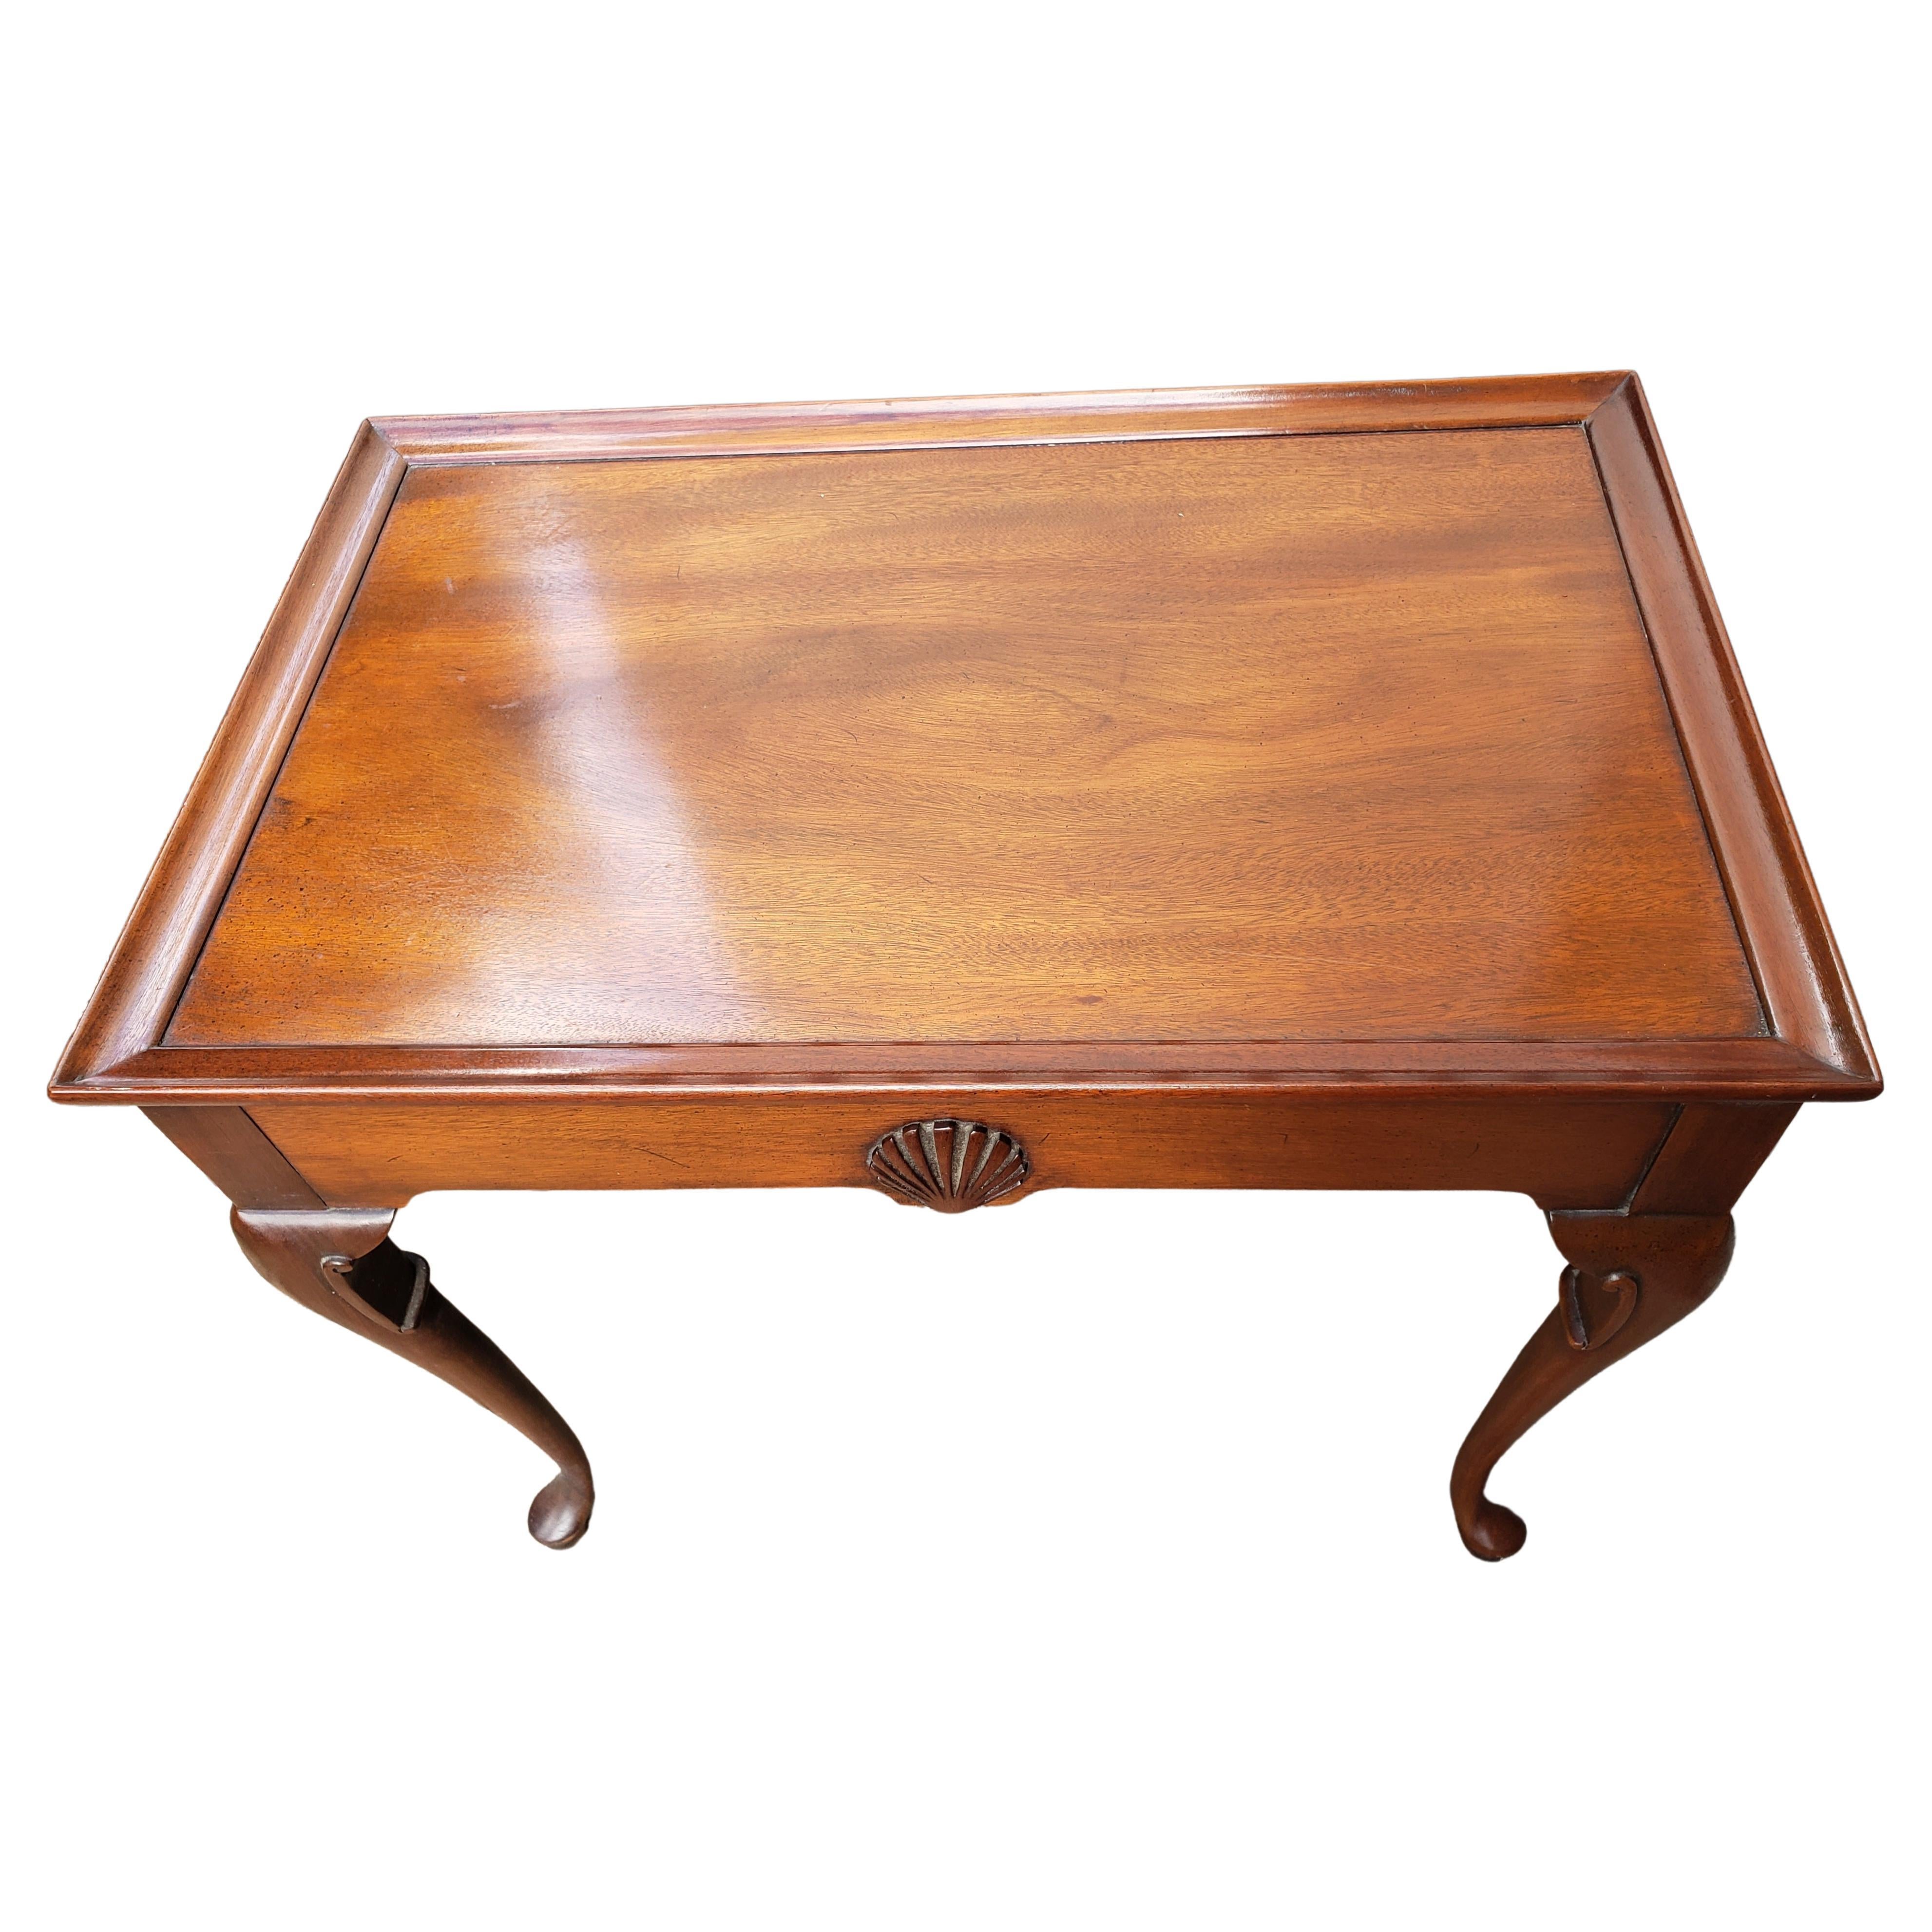 English Mahogany Queen Anne tray top tea table with pull-out slides and supported by graceful cabriole legs ending on pad feet, early 19th century. Attributed to Hickory Chair Company. Sticker partial. Measures 28